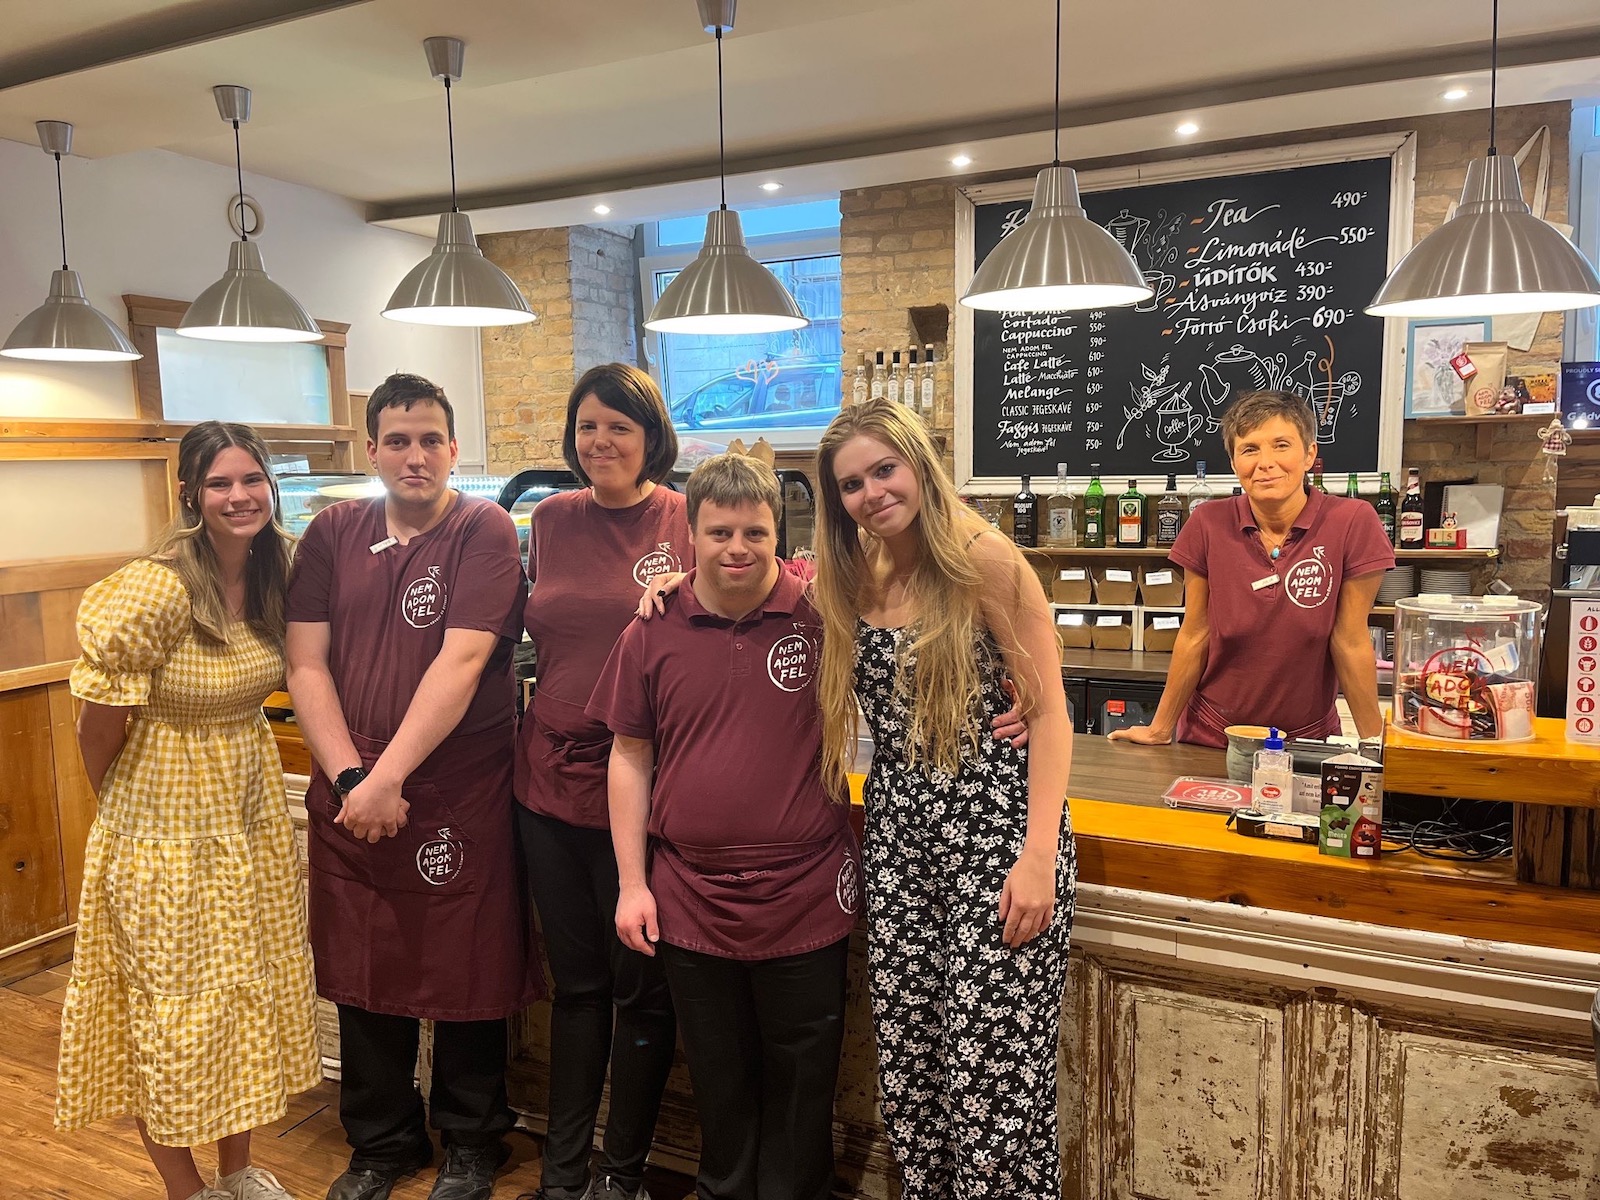 Leadership for Social Good study abroad program students, Katerina Addington (business administration) and Lauren Haggerty (industrial design), with the staff at Nem Adom Fel (“I Don’t Give Up”) Café, a social enterprise in Budapest, Hungary operated by people with disabilities.